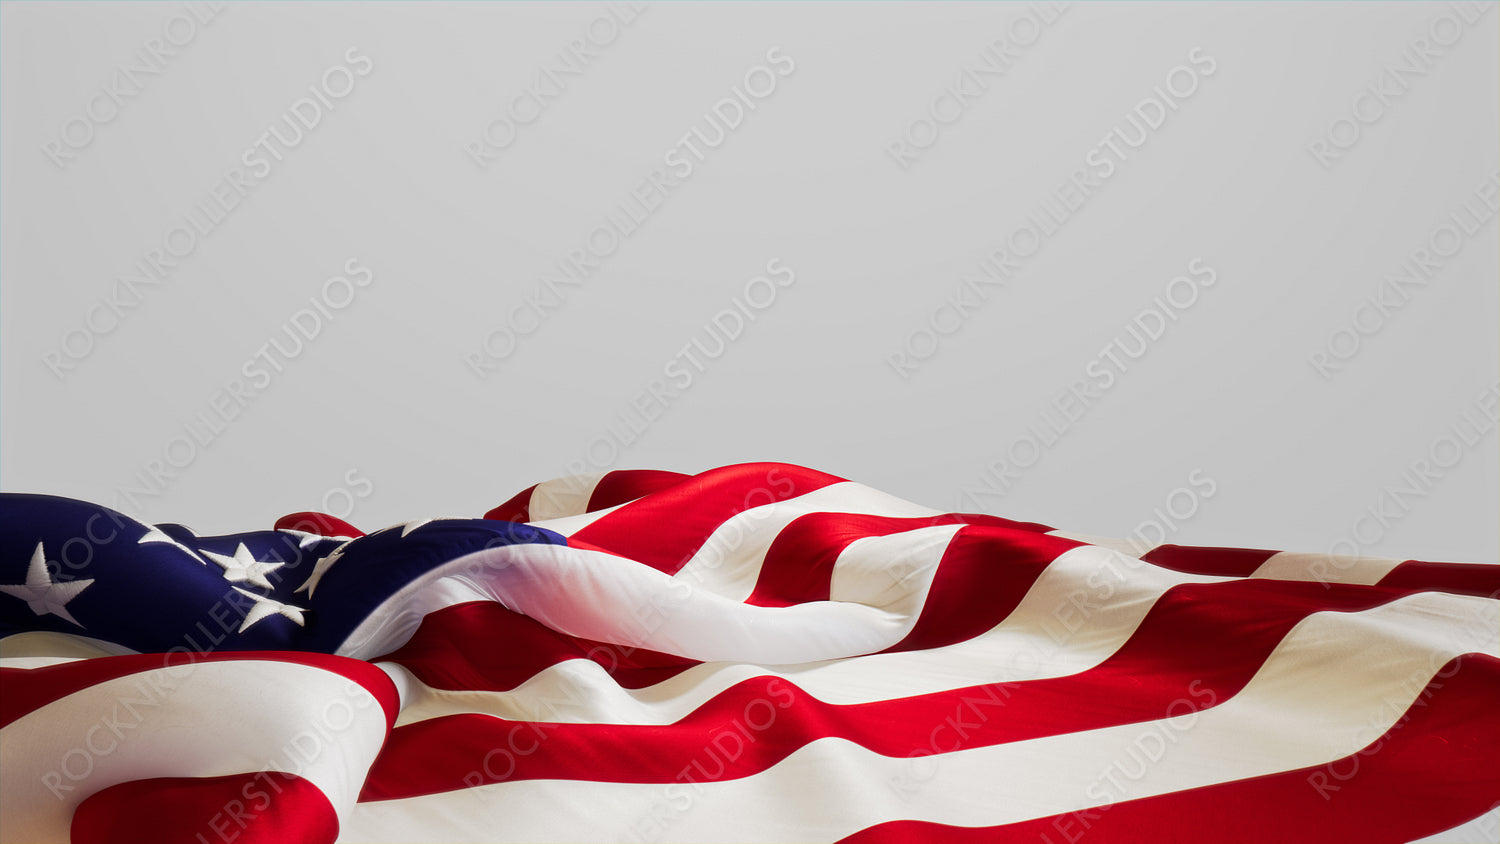 Authentic Banner for Memorial Day with United States Flag, Isolated on White Background with Copy-Space.